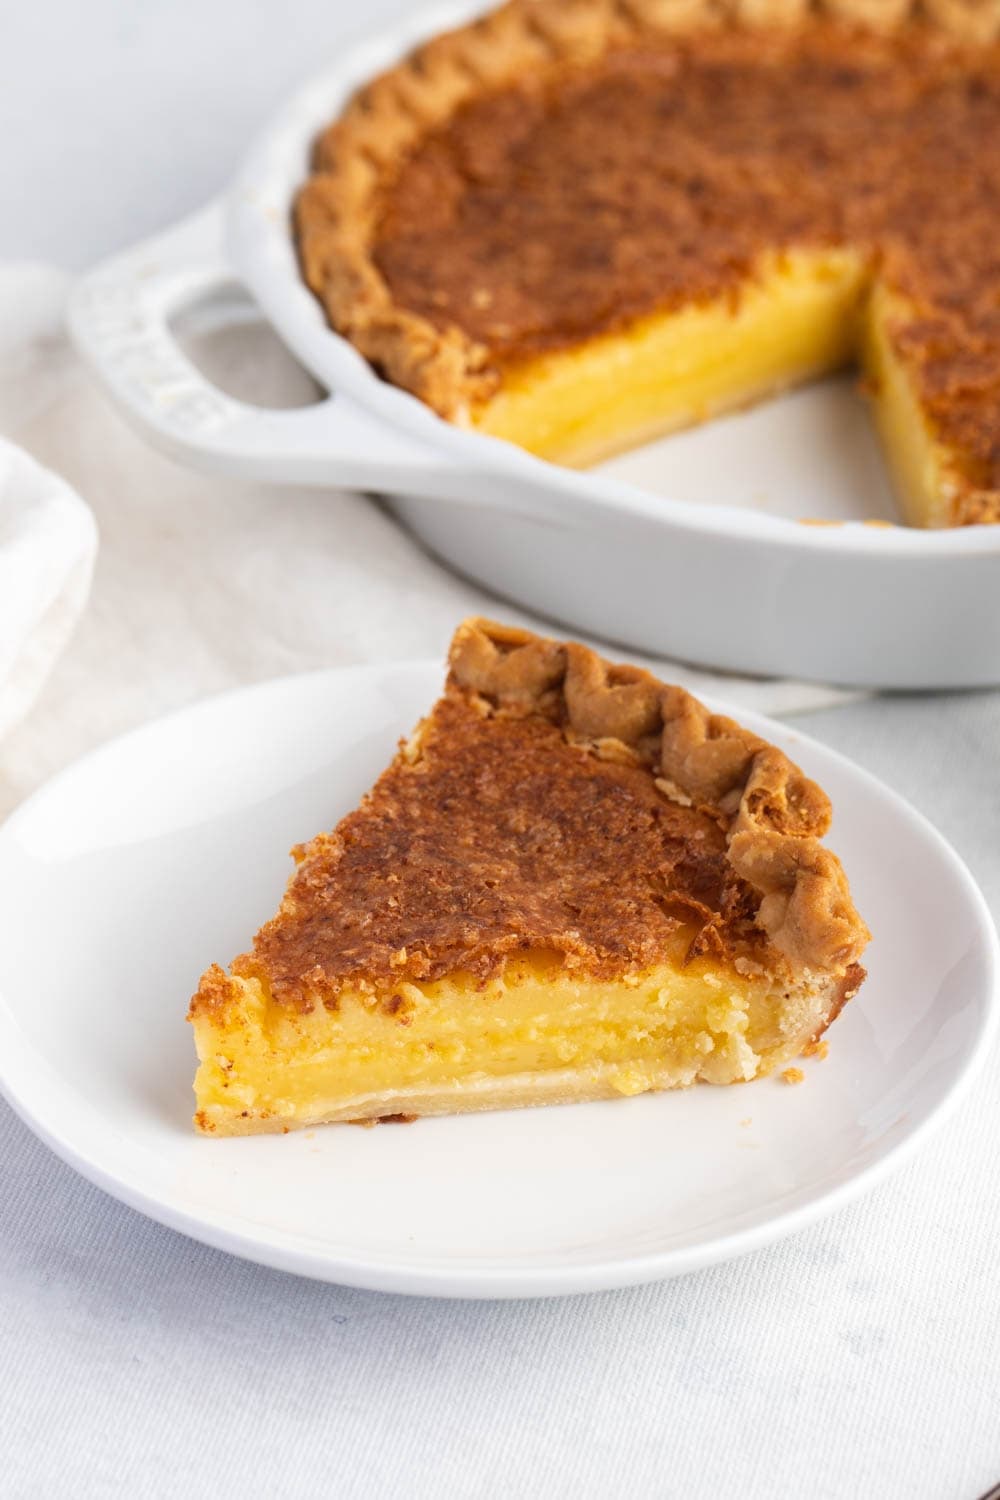 A serving of chess pie with creamy custard filling and crumbly toppings on a white plate.